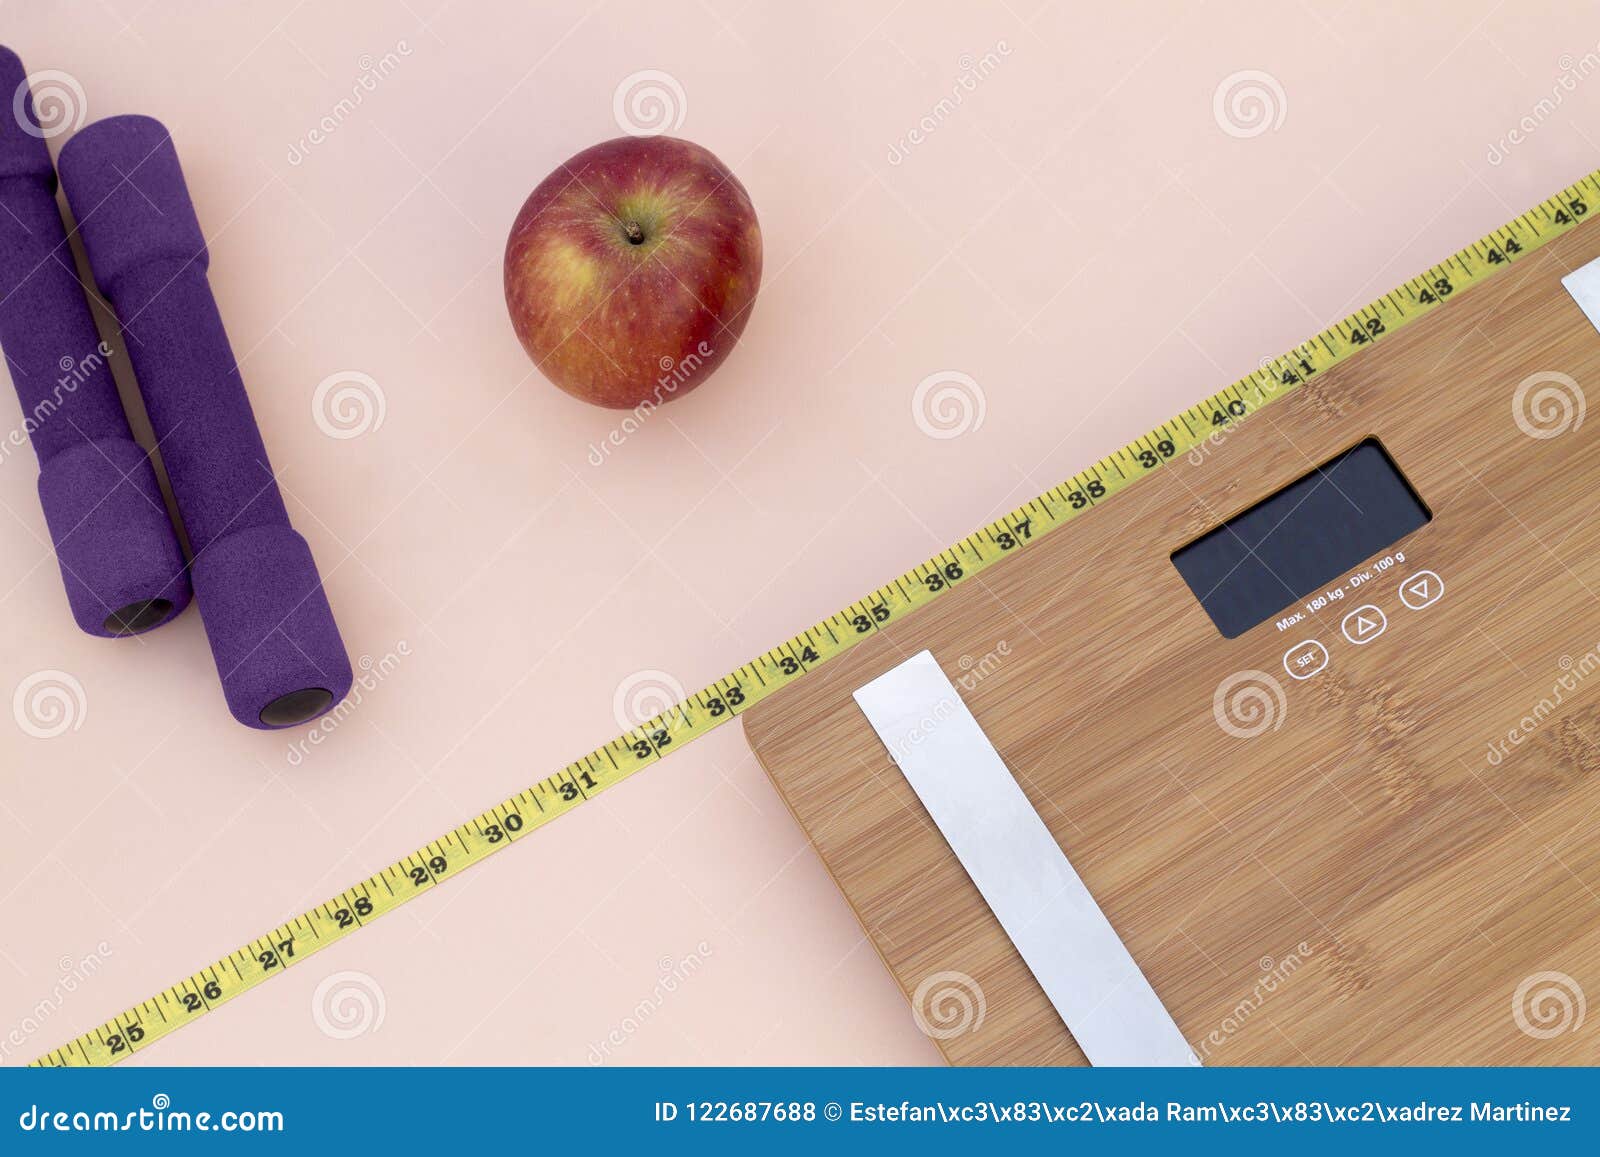 still life photography with a red apple, weight tape measure and a scale